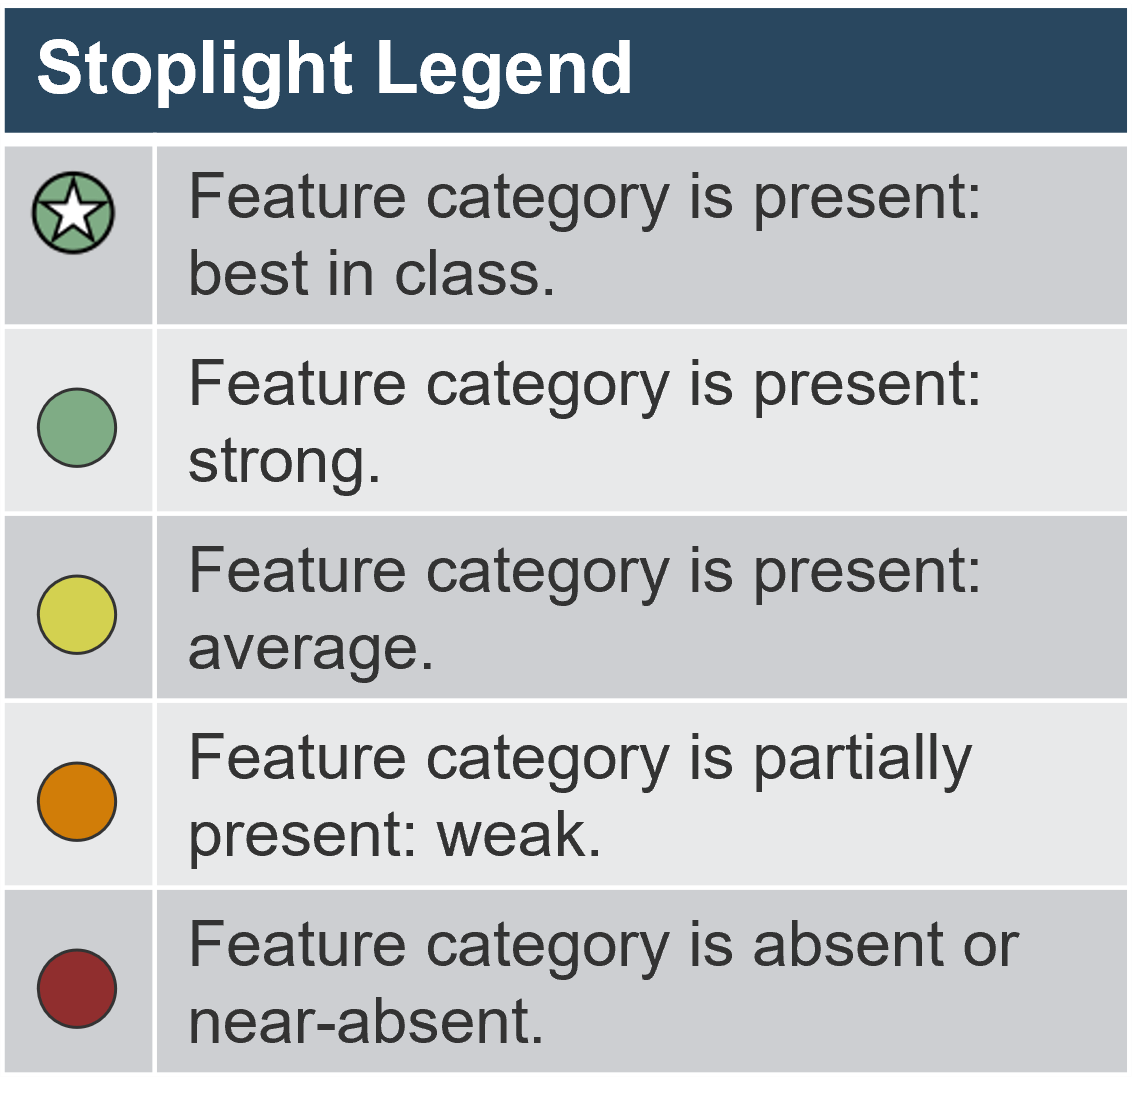 'Stoplight Legend' with green+star 'Feature category is present: best in class', green 'Feature category is present: strong', yellow 'Feature category is present: average', orange 'Feature category is partially present: weak', and red 'Feature category is absent or near-absent'.